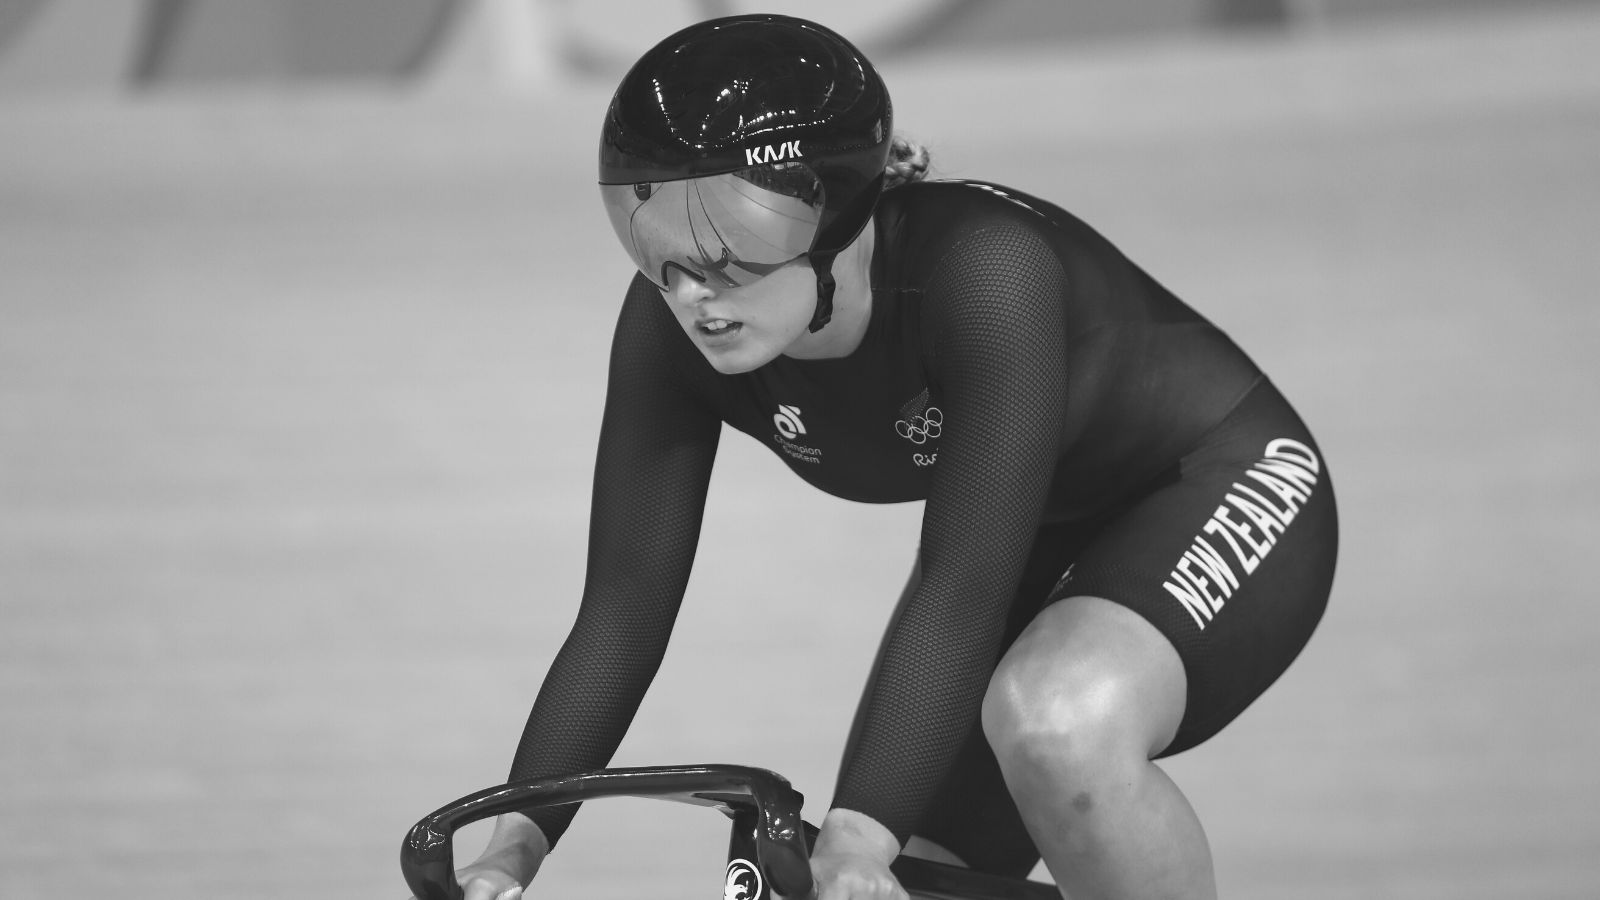 New Zealand Olympic cyclist Olivia Podmore dies at 24